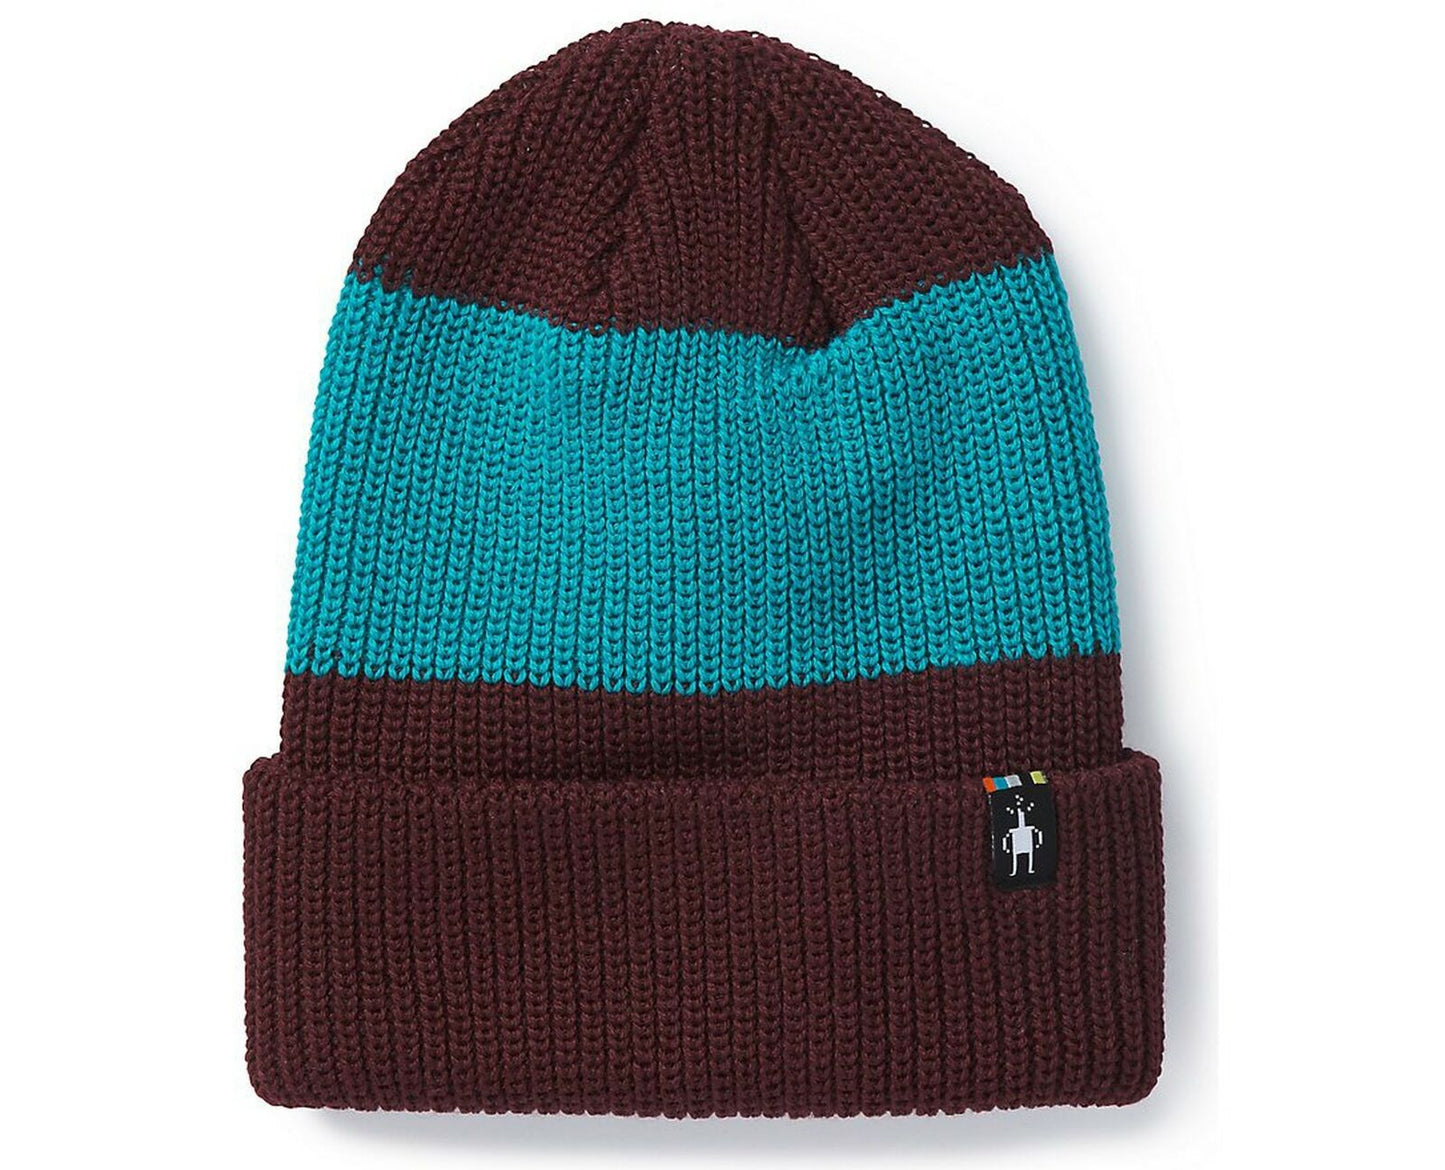 SMARTWOOL-H-HAT SNOW SEEKER RIBBED CUFF